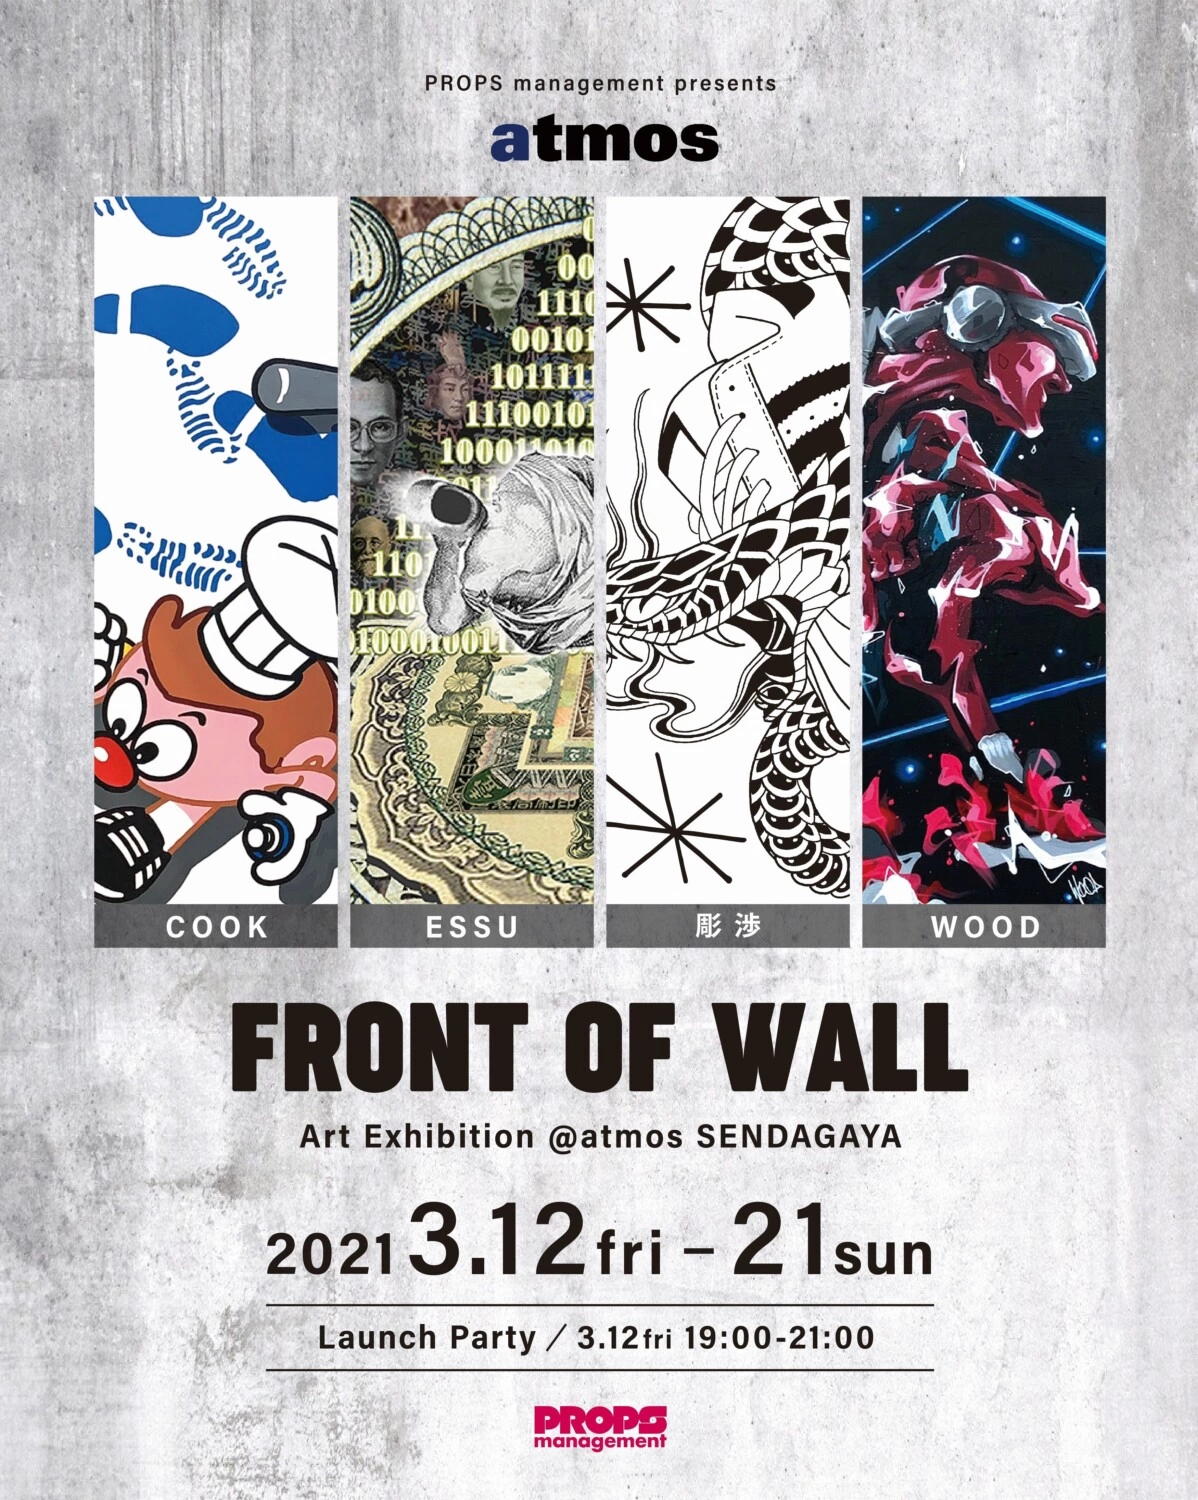 PROPS management Presents "FRONT OF WALL"